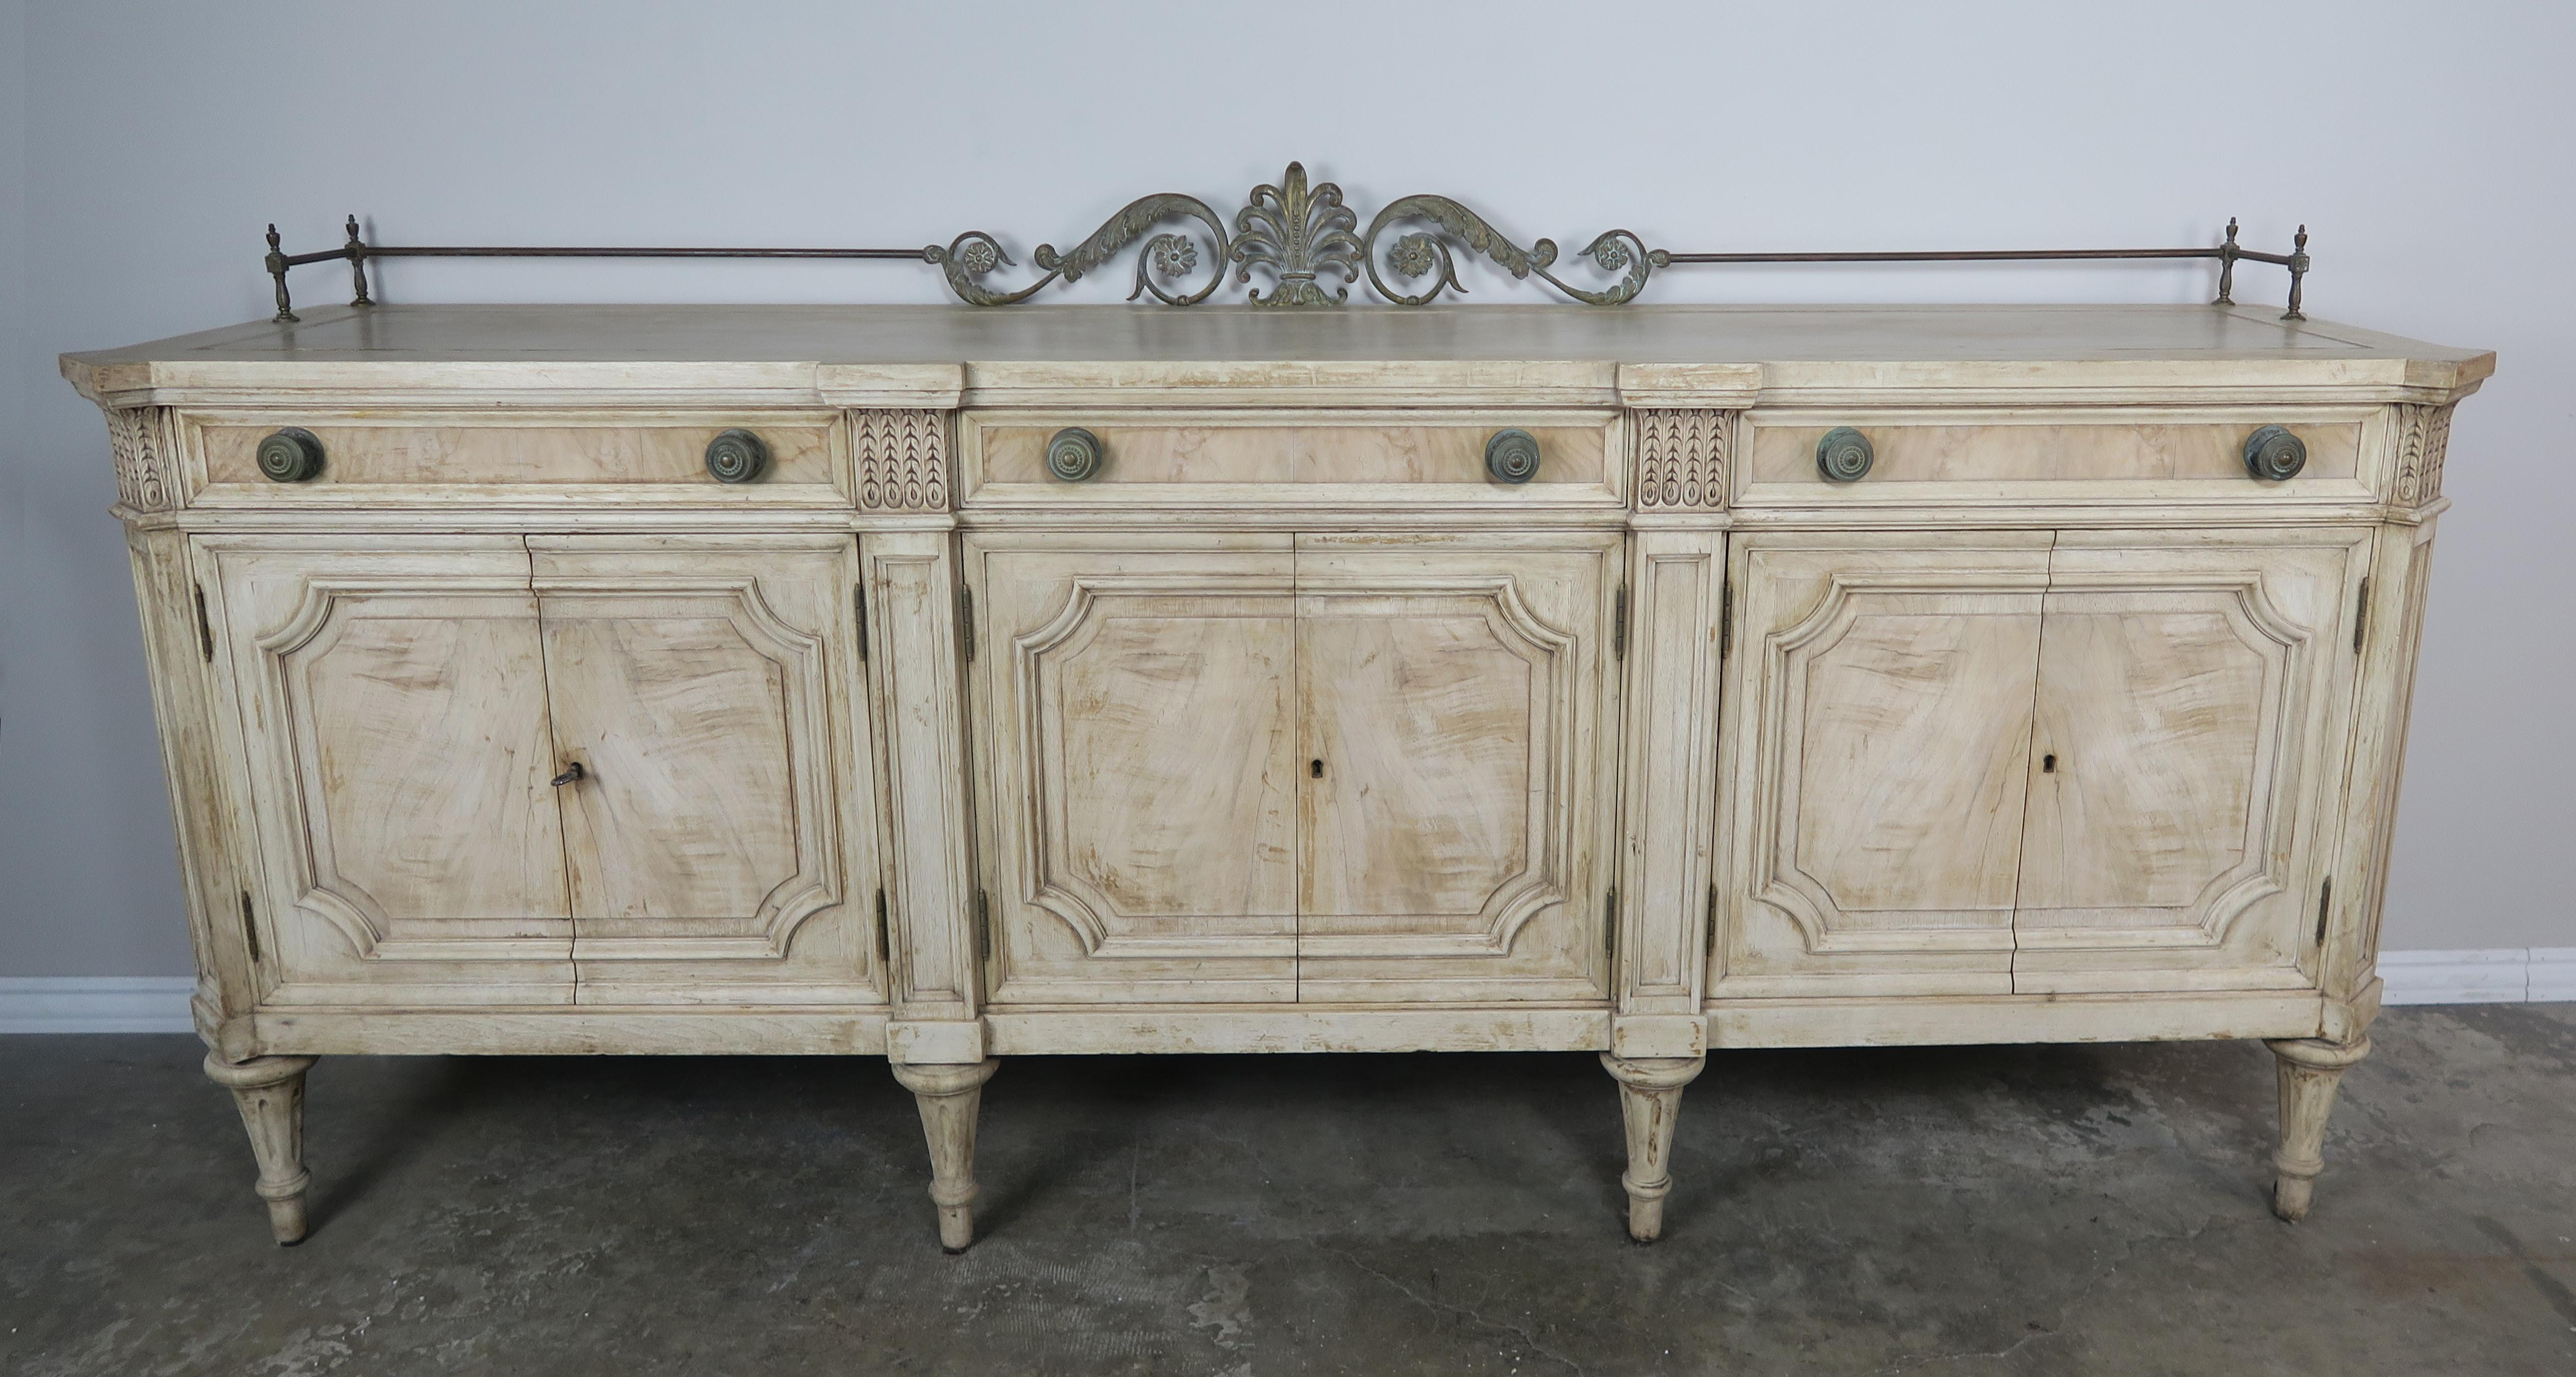 French Louis XVI bleached walnut neoclassical style sideboard with six doors and three drawer. Beautiful natural finish with a brass gallery depicting a center urn flanked by acanthus leaf detail.